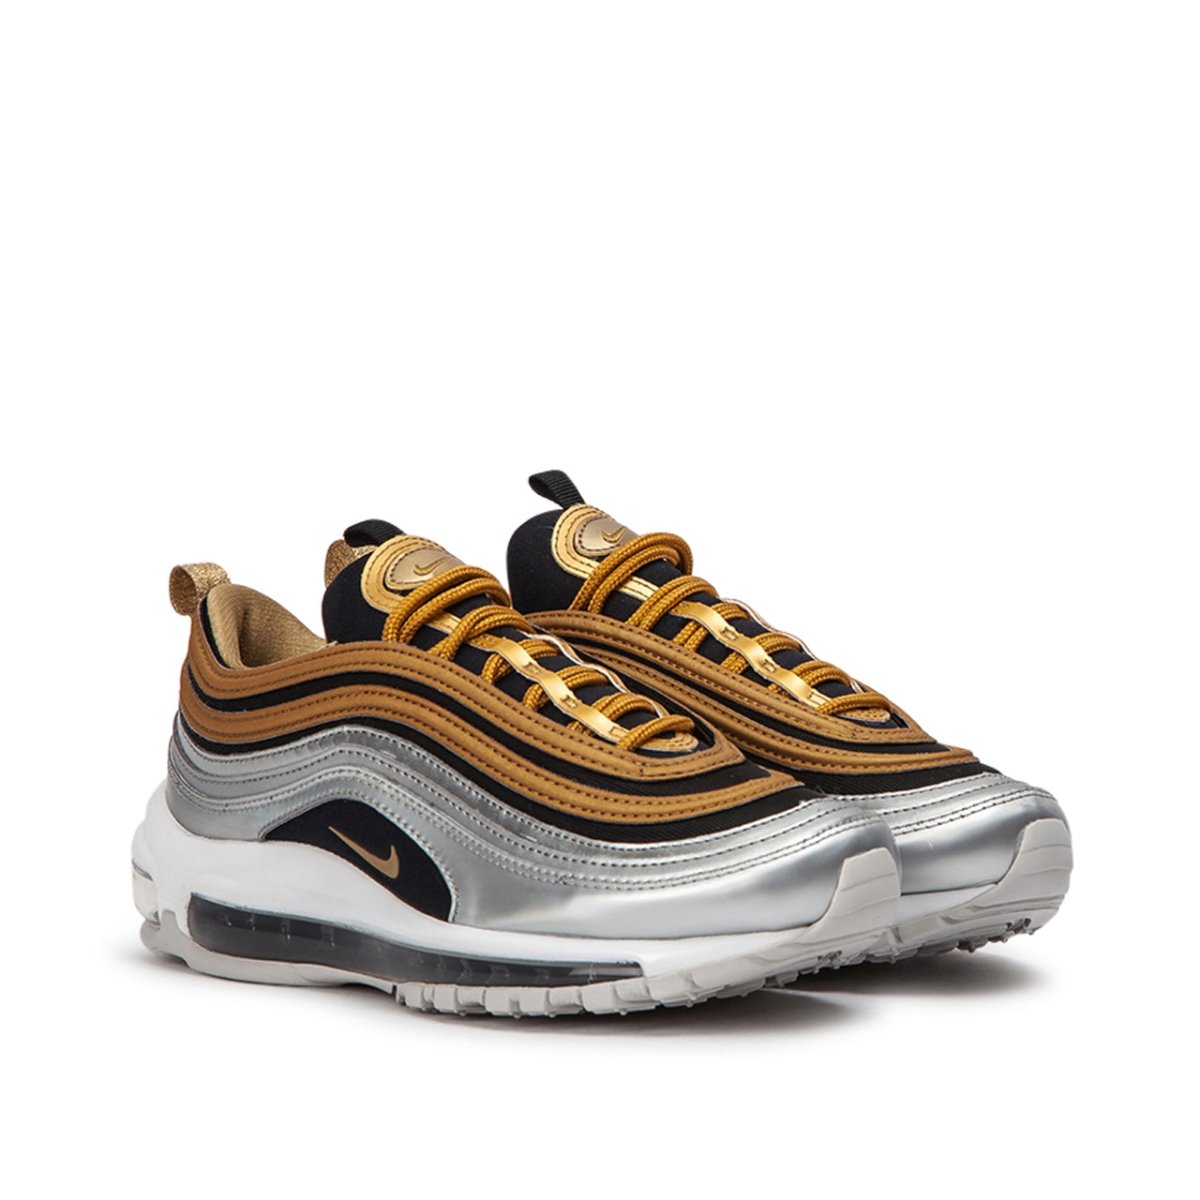 Nike WMNS Air Max 97 SE (Gold)  - Allike Store